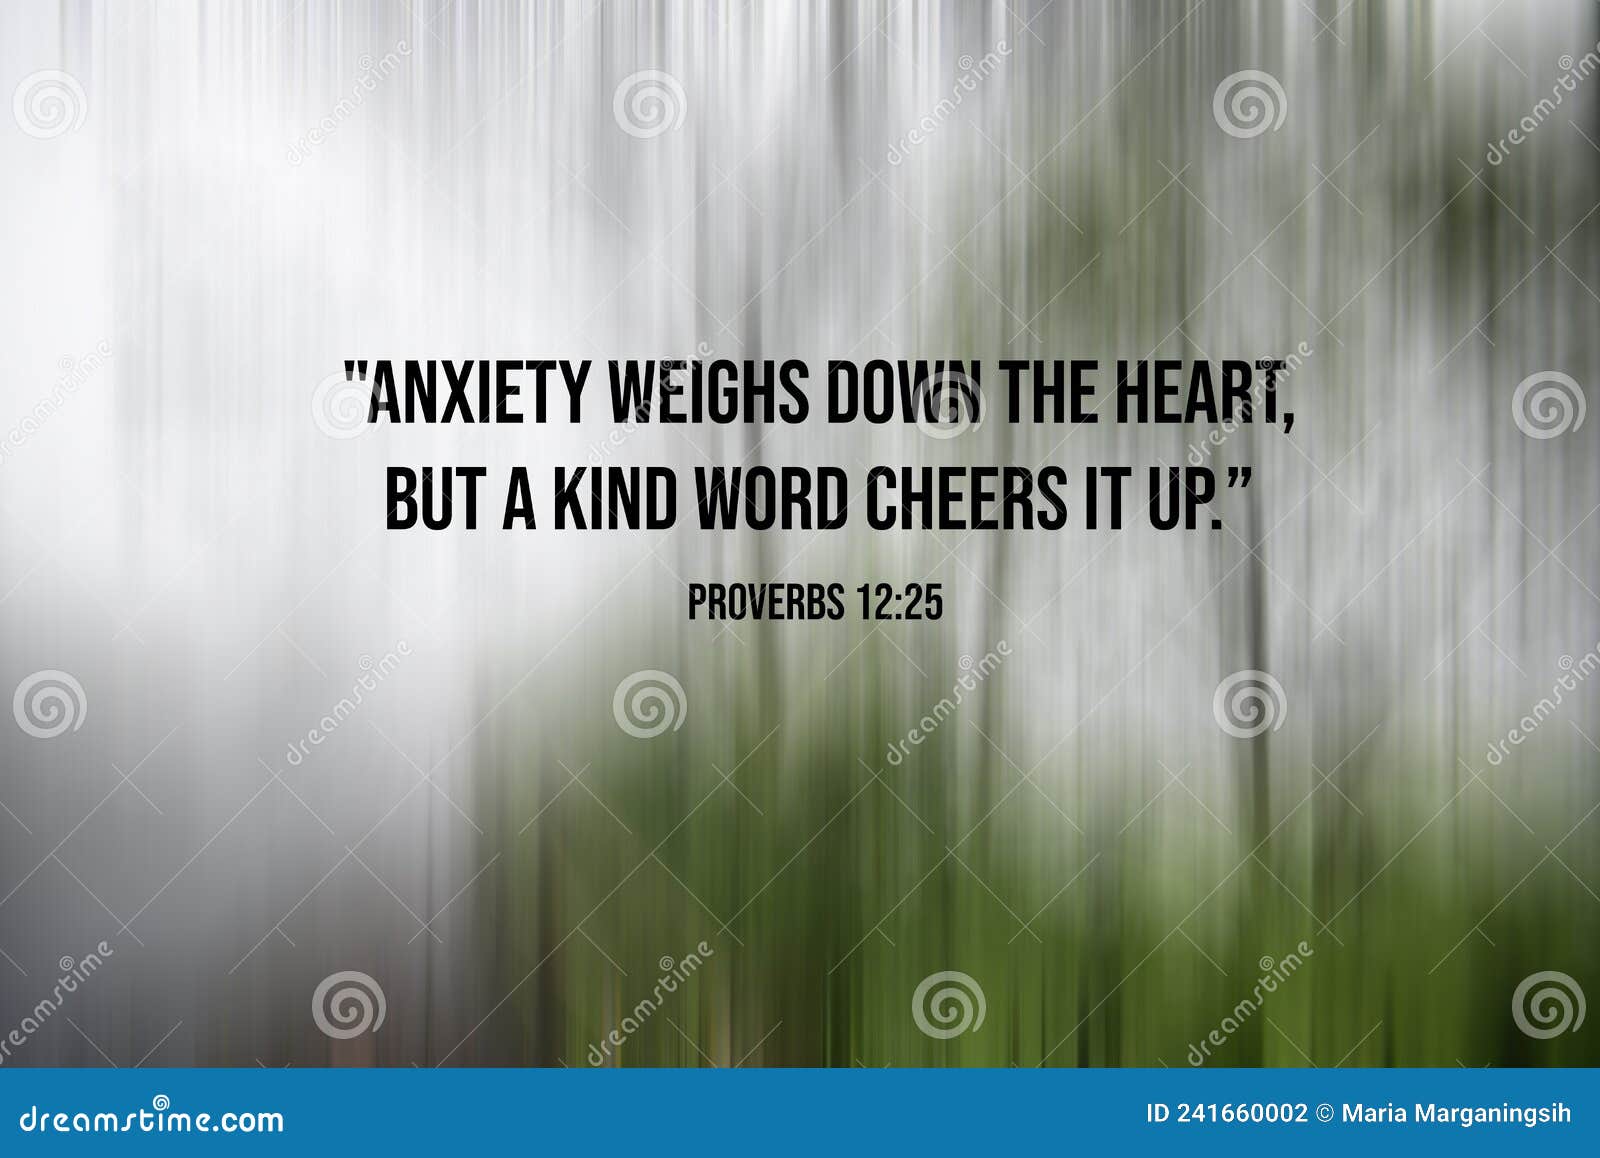 Bible Verse Inspirational Quote - Anxiety Weighs Down the Heart ...